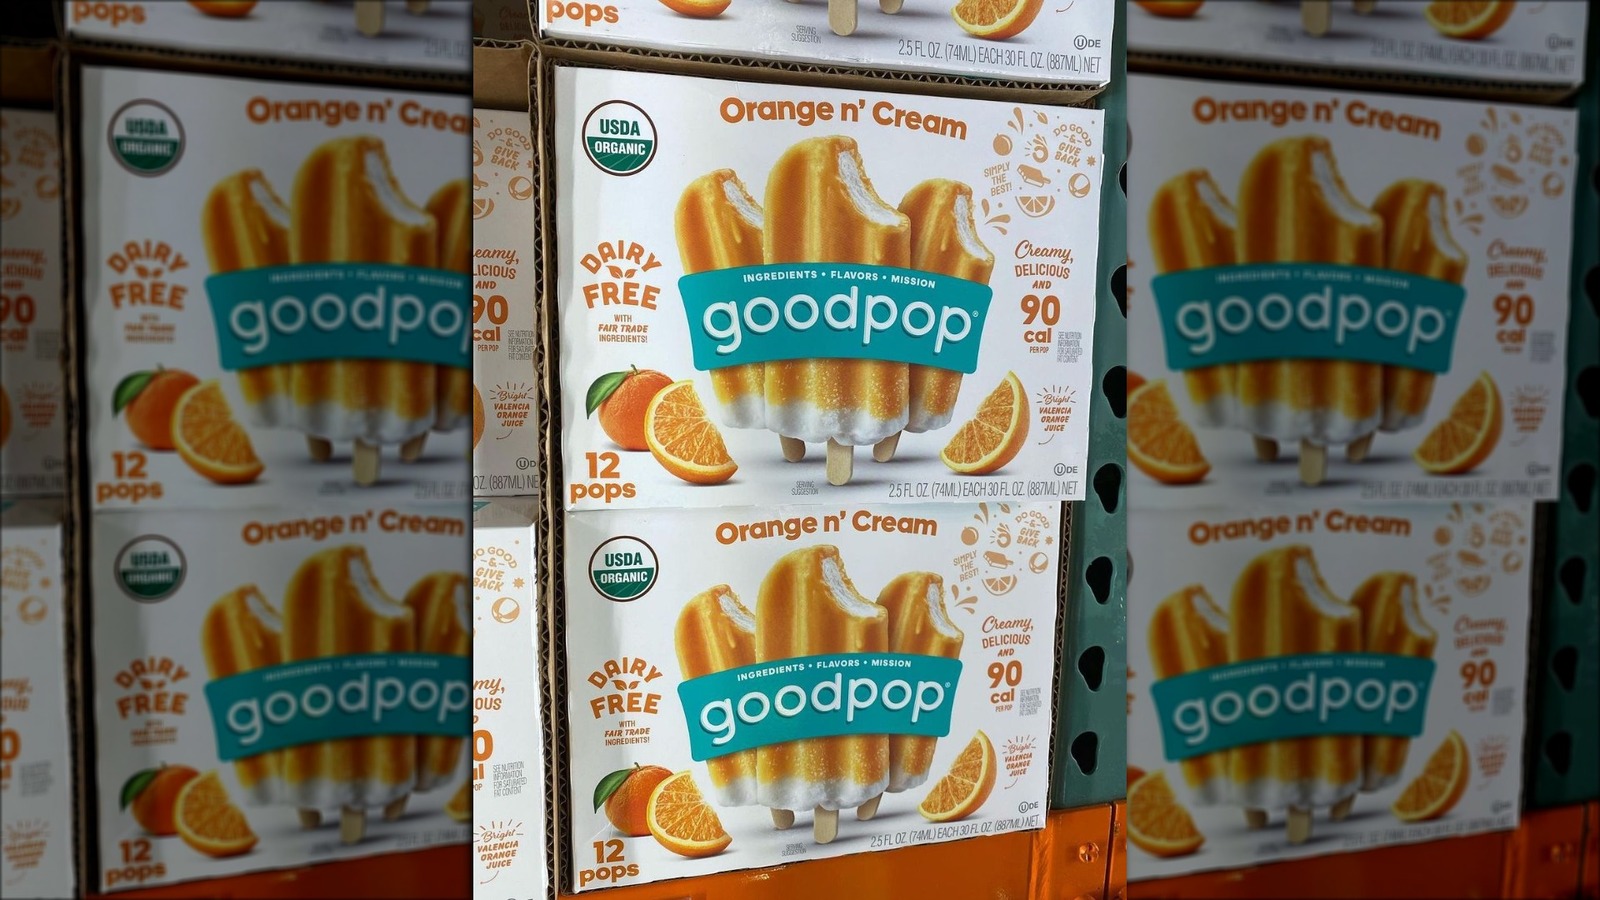 https://www.mashed.com/img/gallery/costcos-goodpop-orange-and-cream-popsicles-have-shoppers-divided/l-intro-1620754056.jpg